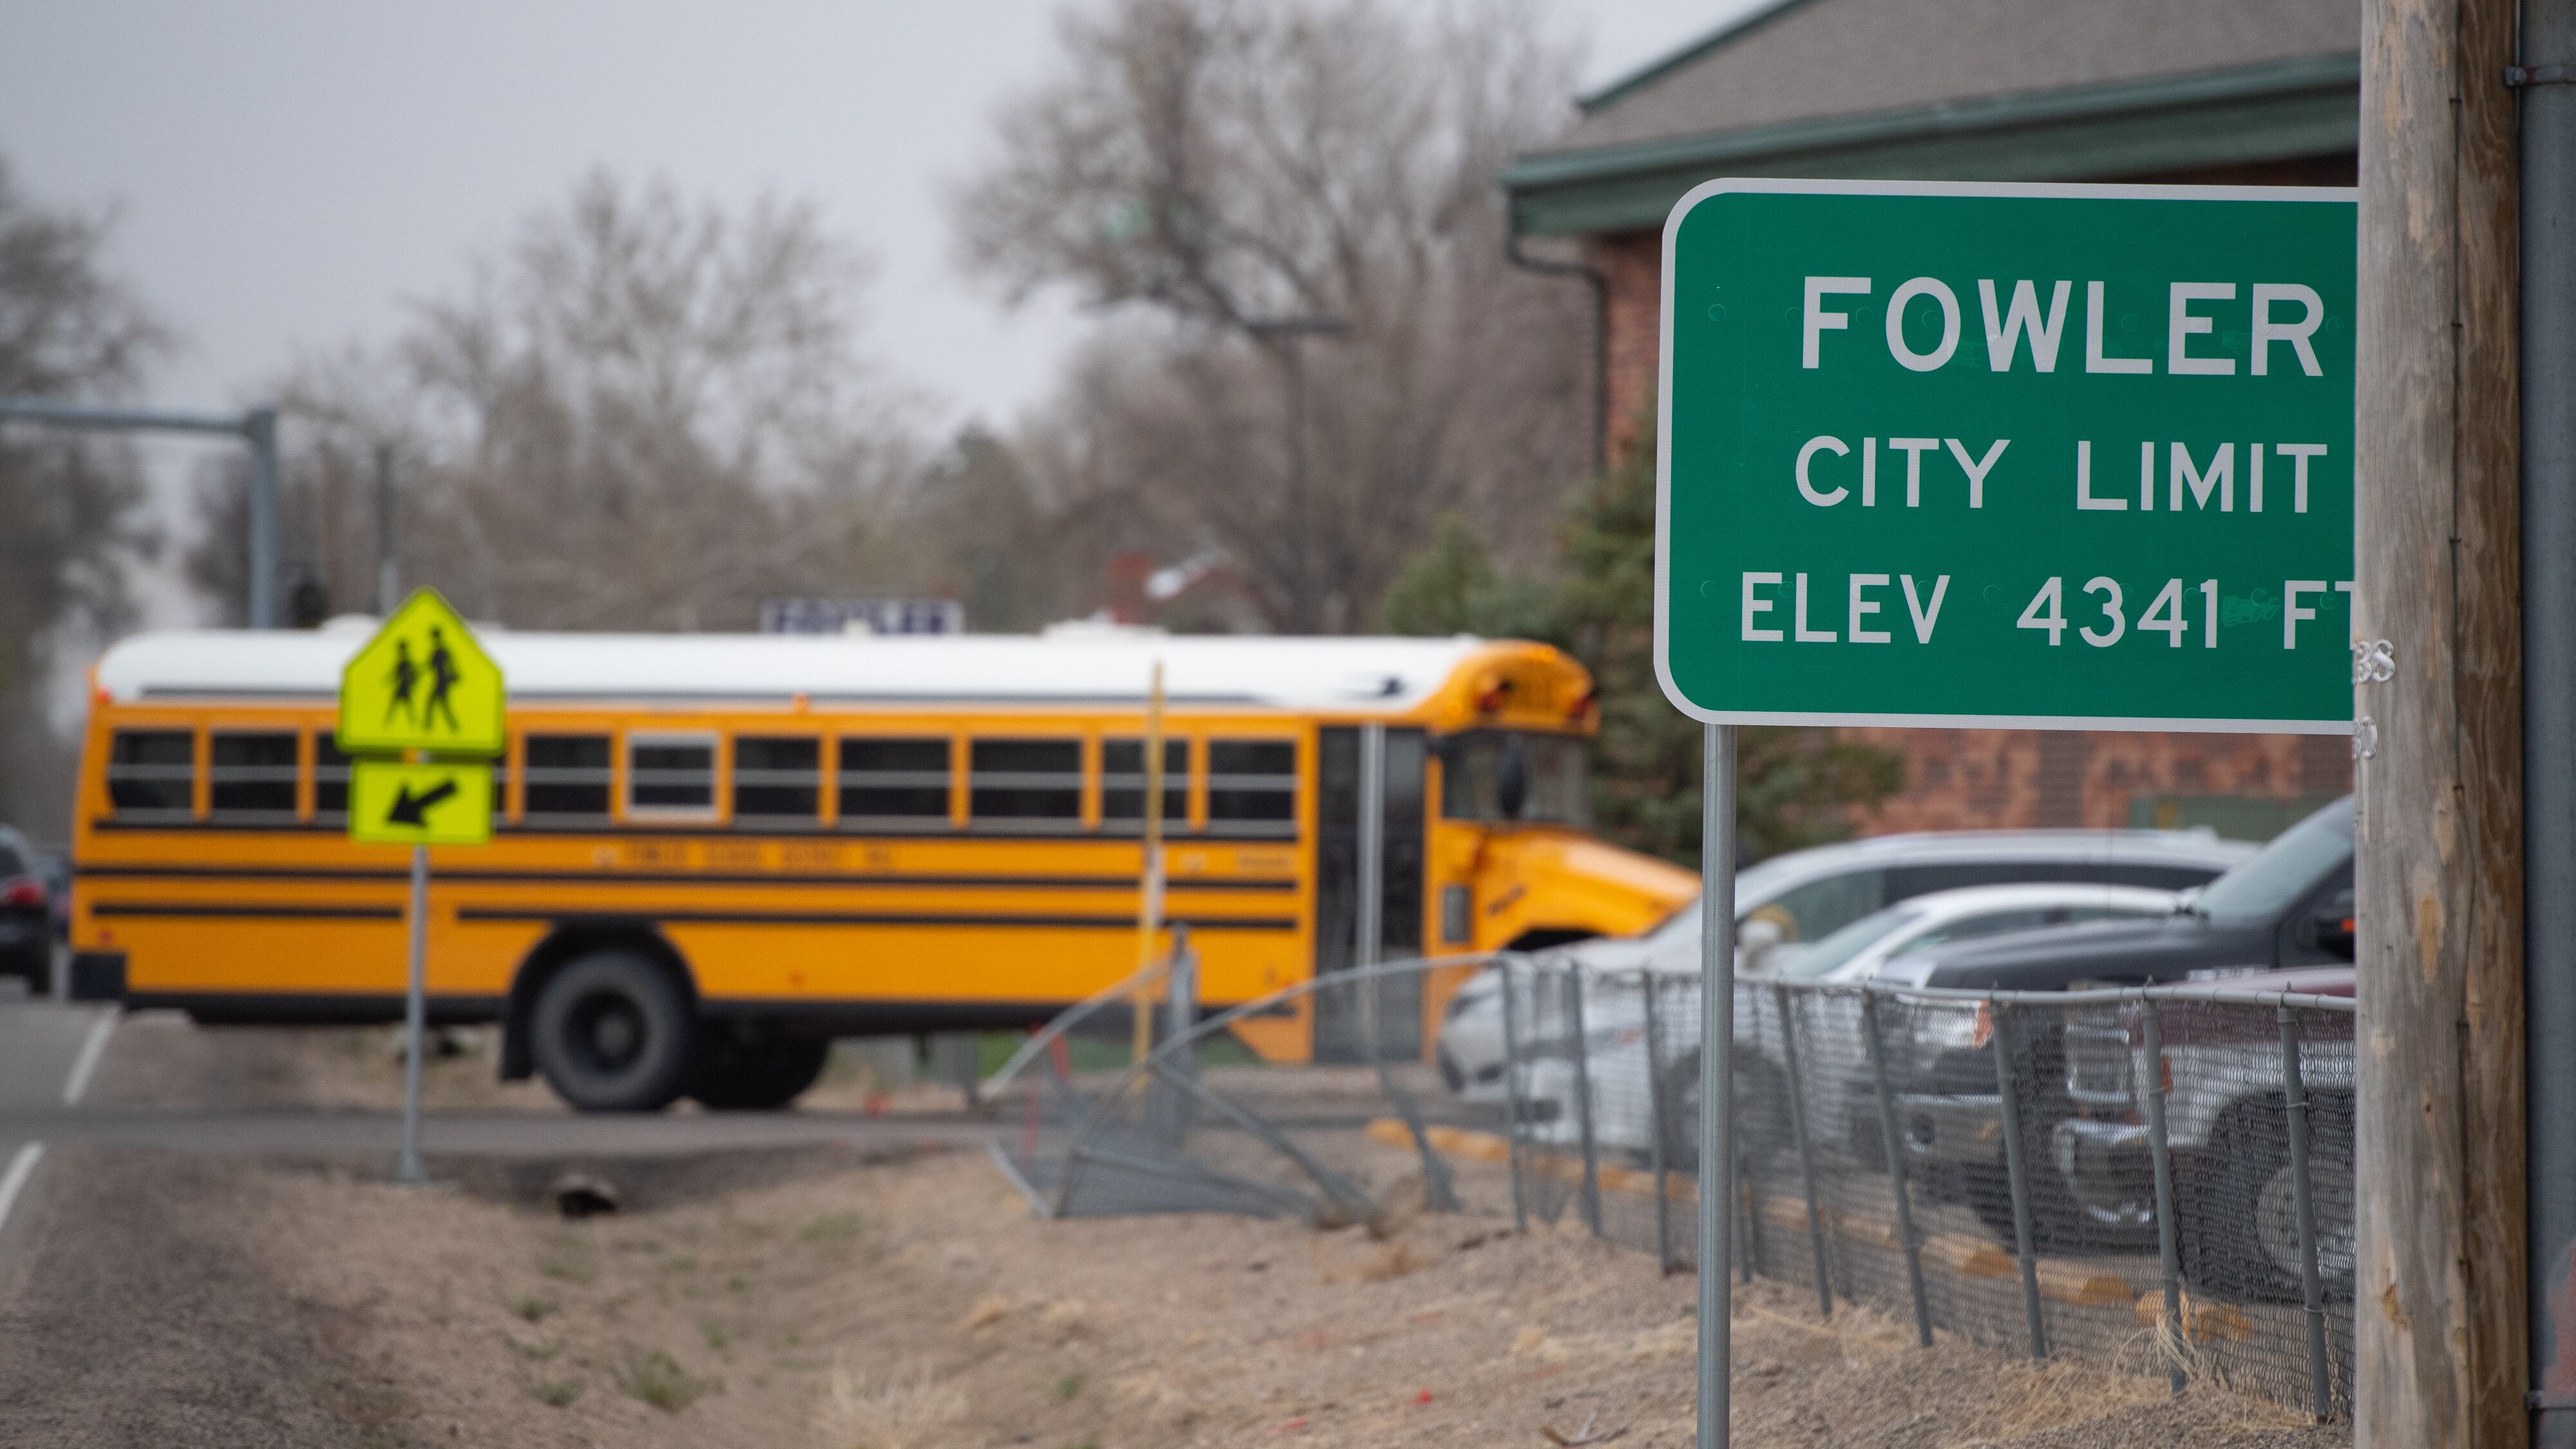 A yellow school bus enters a parking light in the background behind a sign that reads “Fowler.”